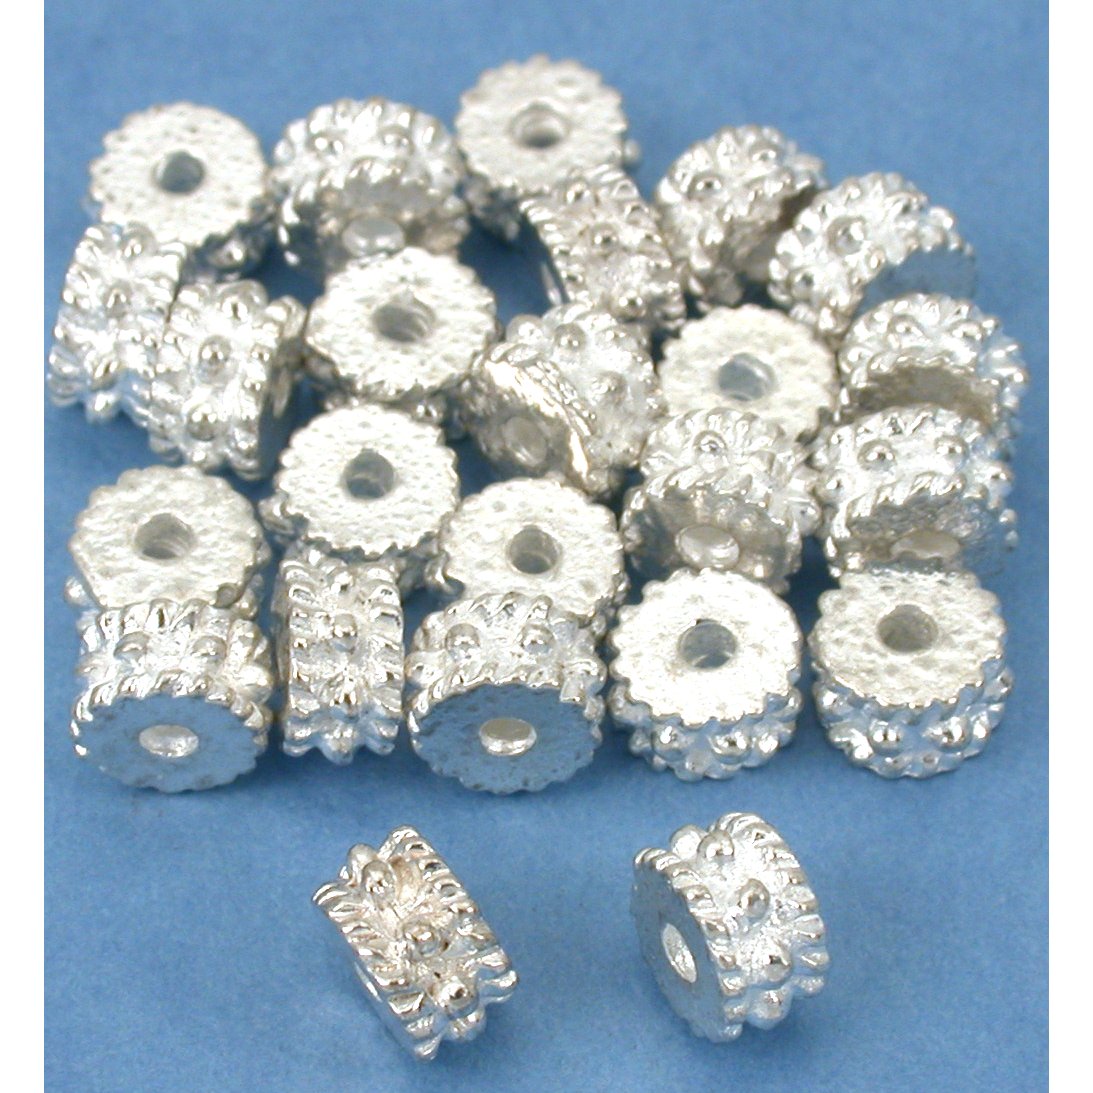 Bali Spacer Beads Silver Plated 4mm 25Pcs Approx.